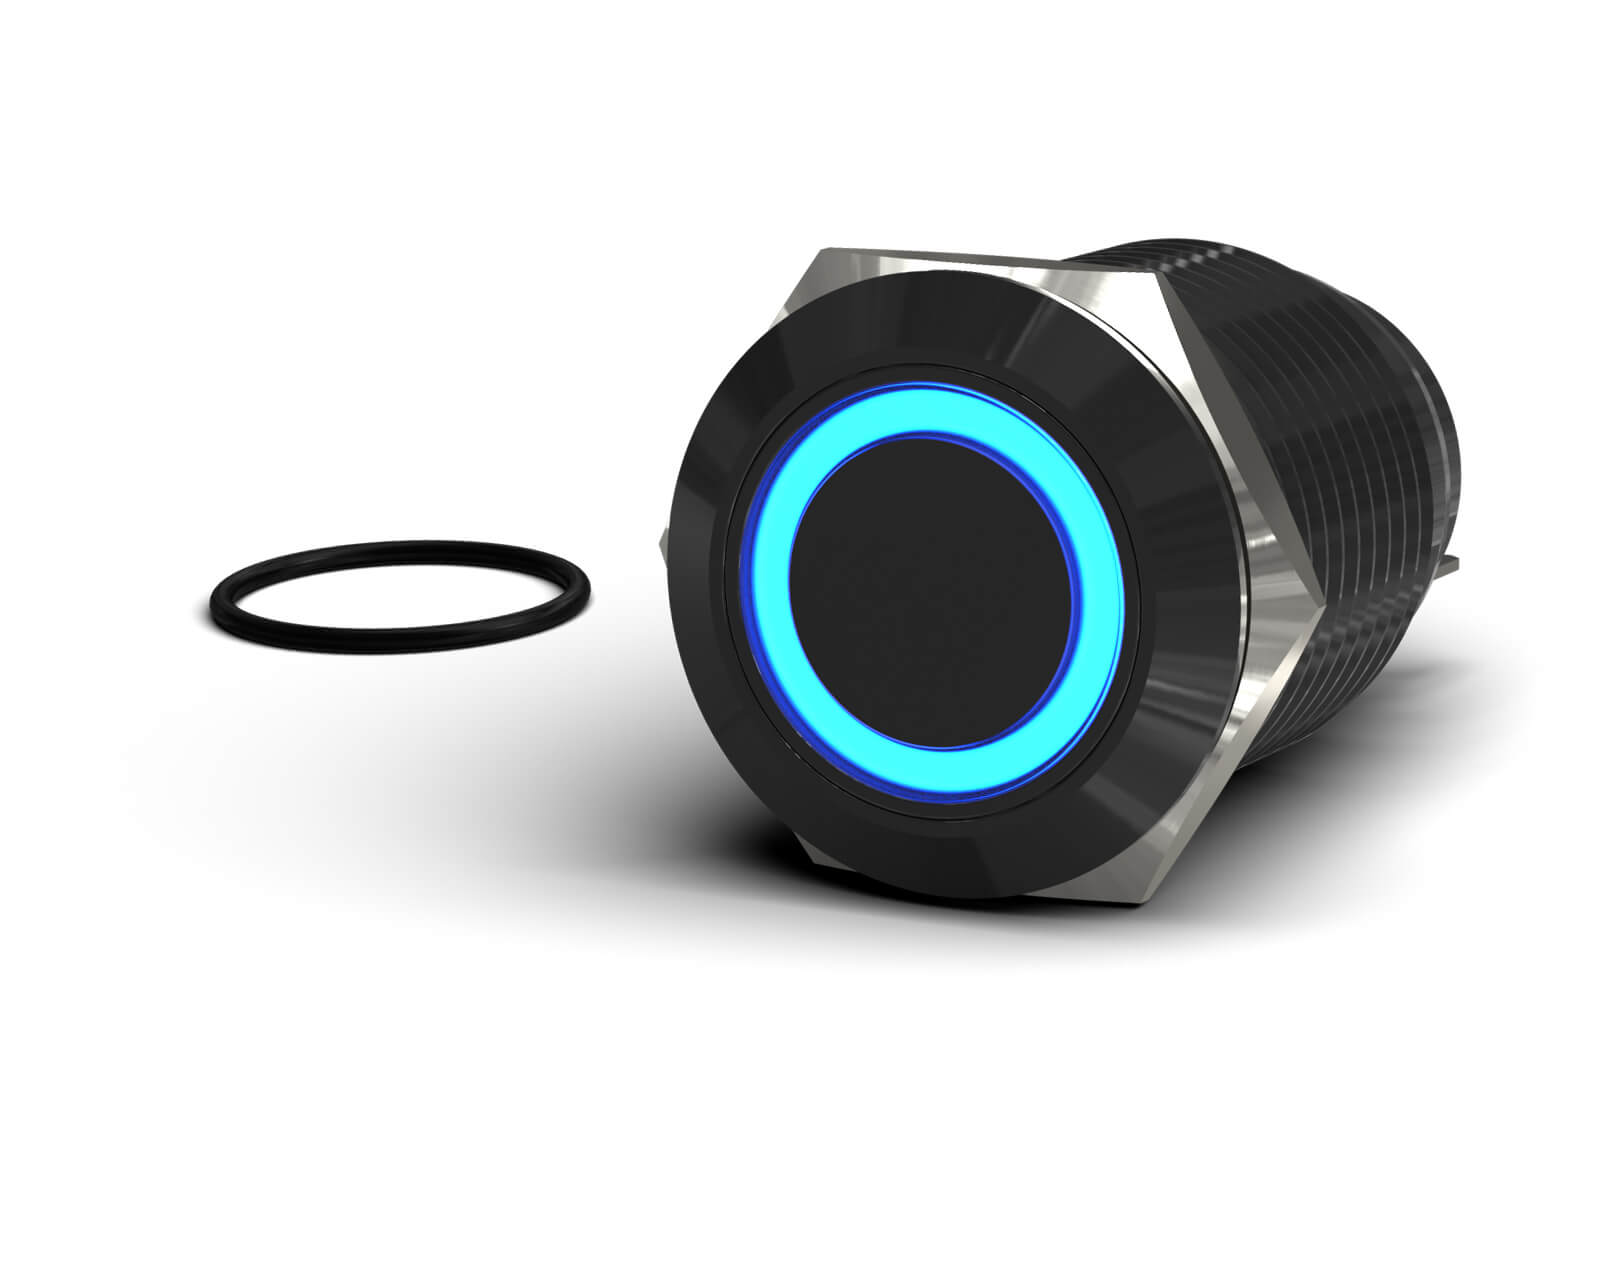 PrimoChill Black Aluminum Momentary Vandal Resistant Switch - 22mm - PrimoChill - KEEPING IT COOL Blue LED Ring